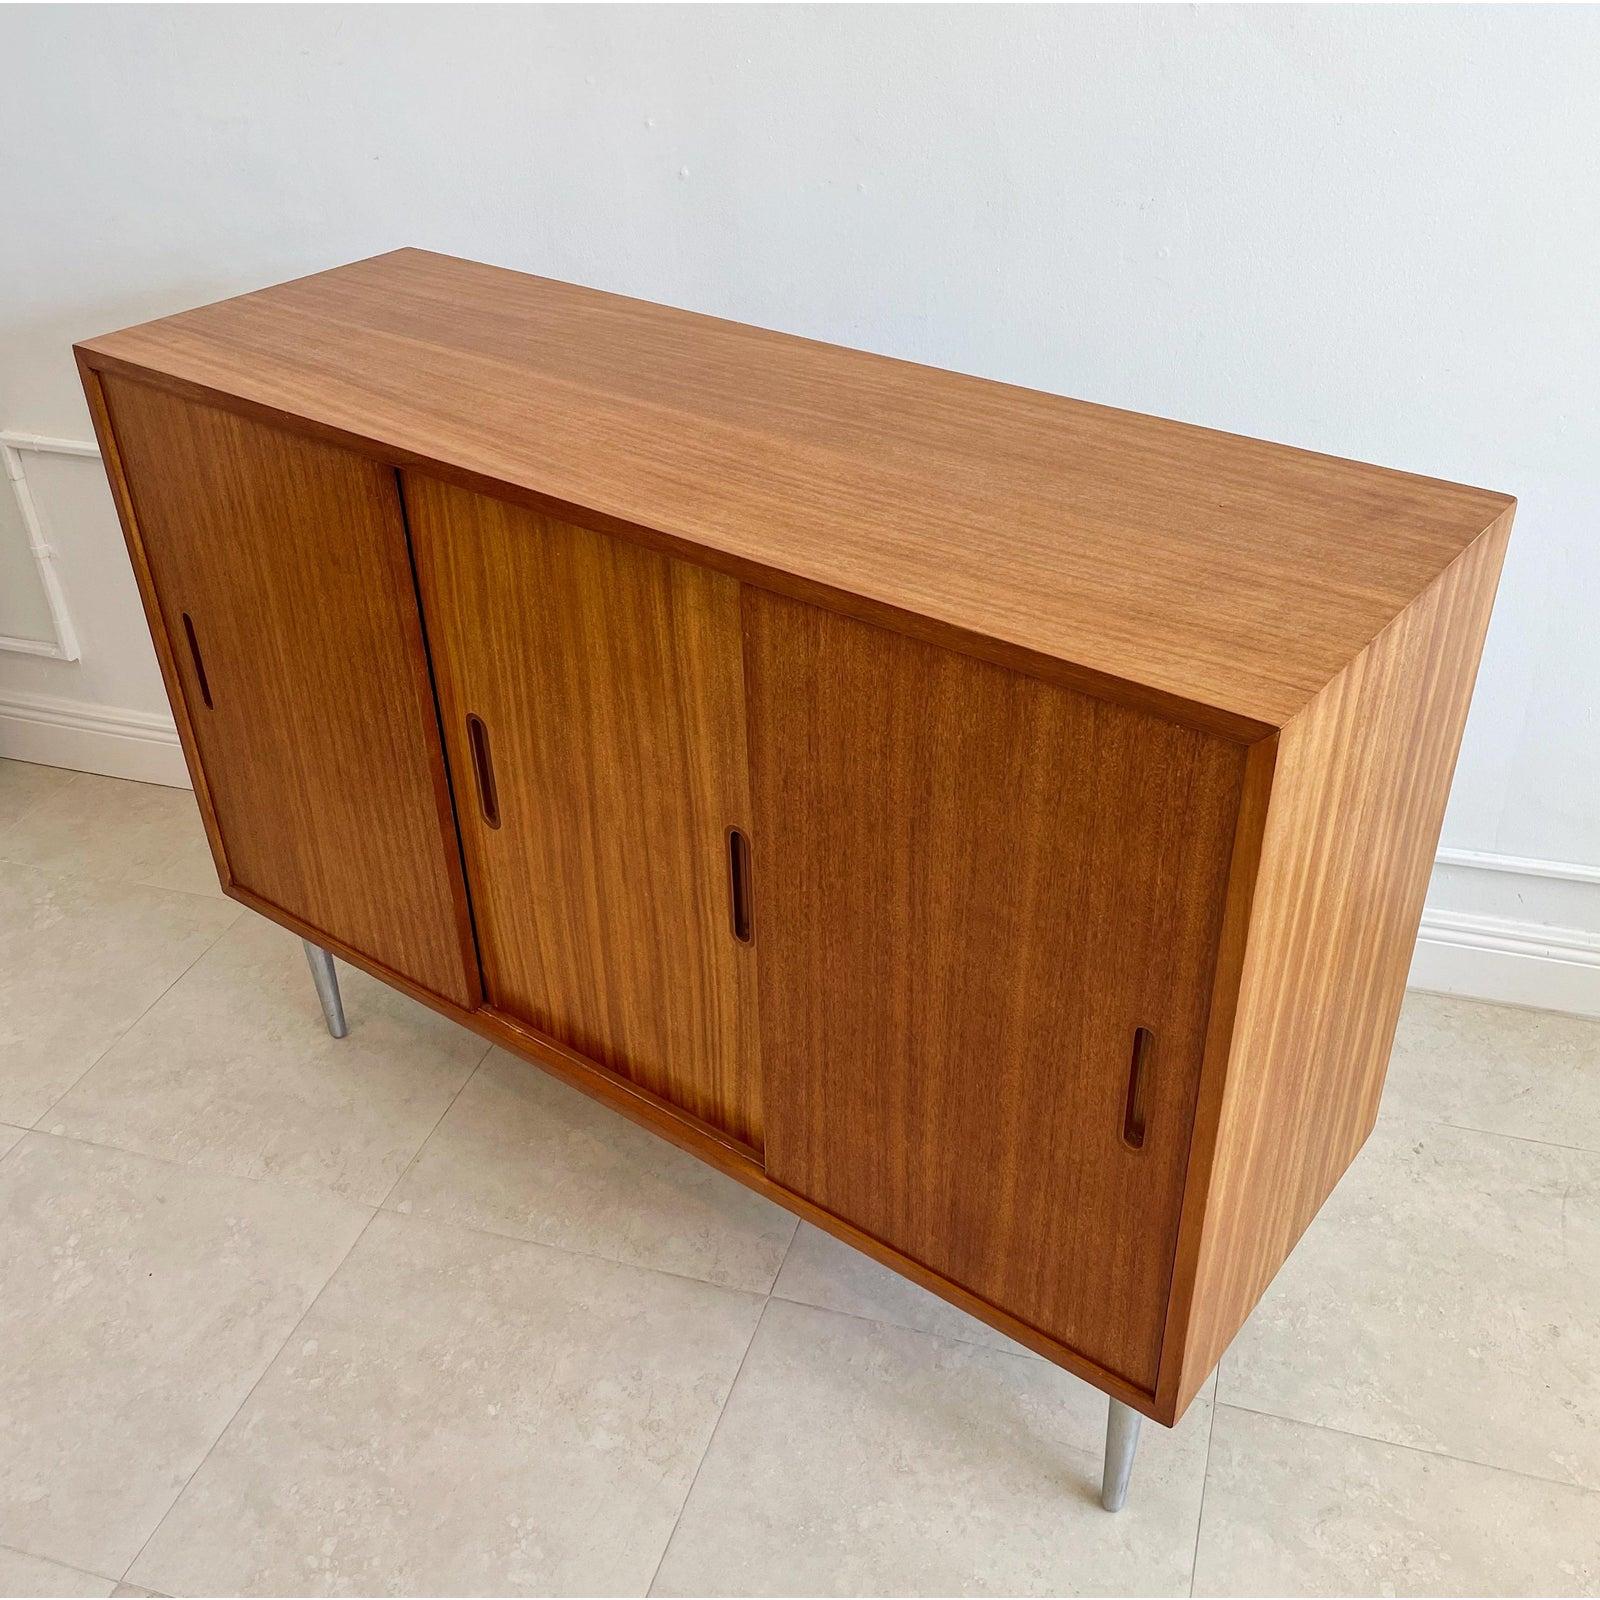 Rare Vintage Edward Wormley for Dunbar Double Sided Room Divider Credenza with S For Sale 1